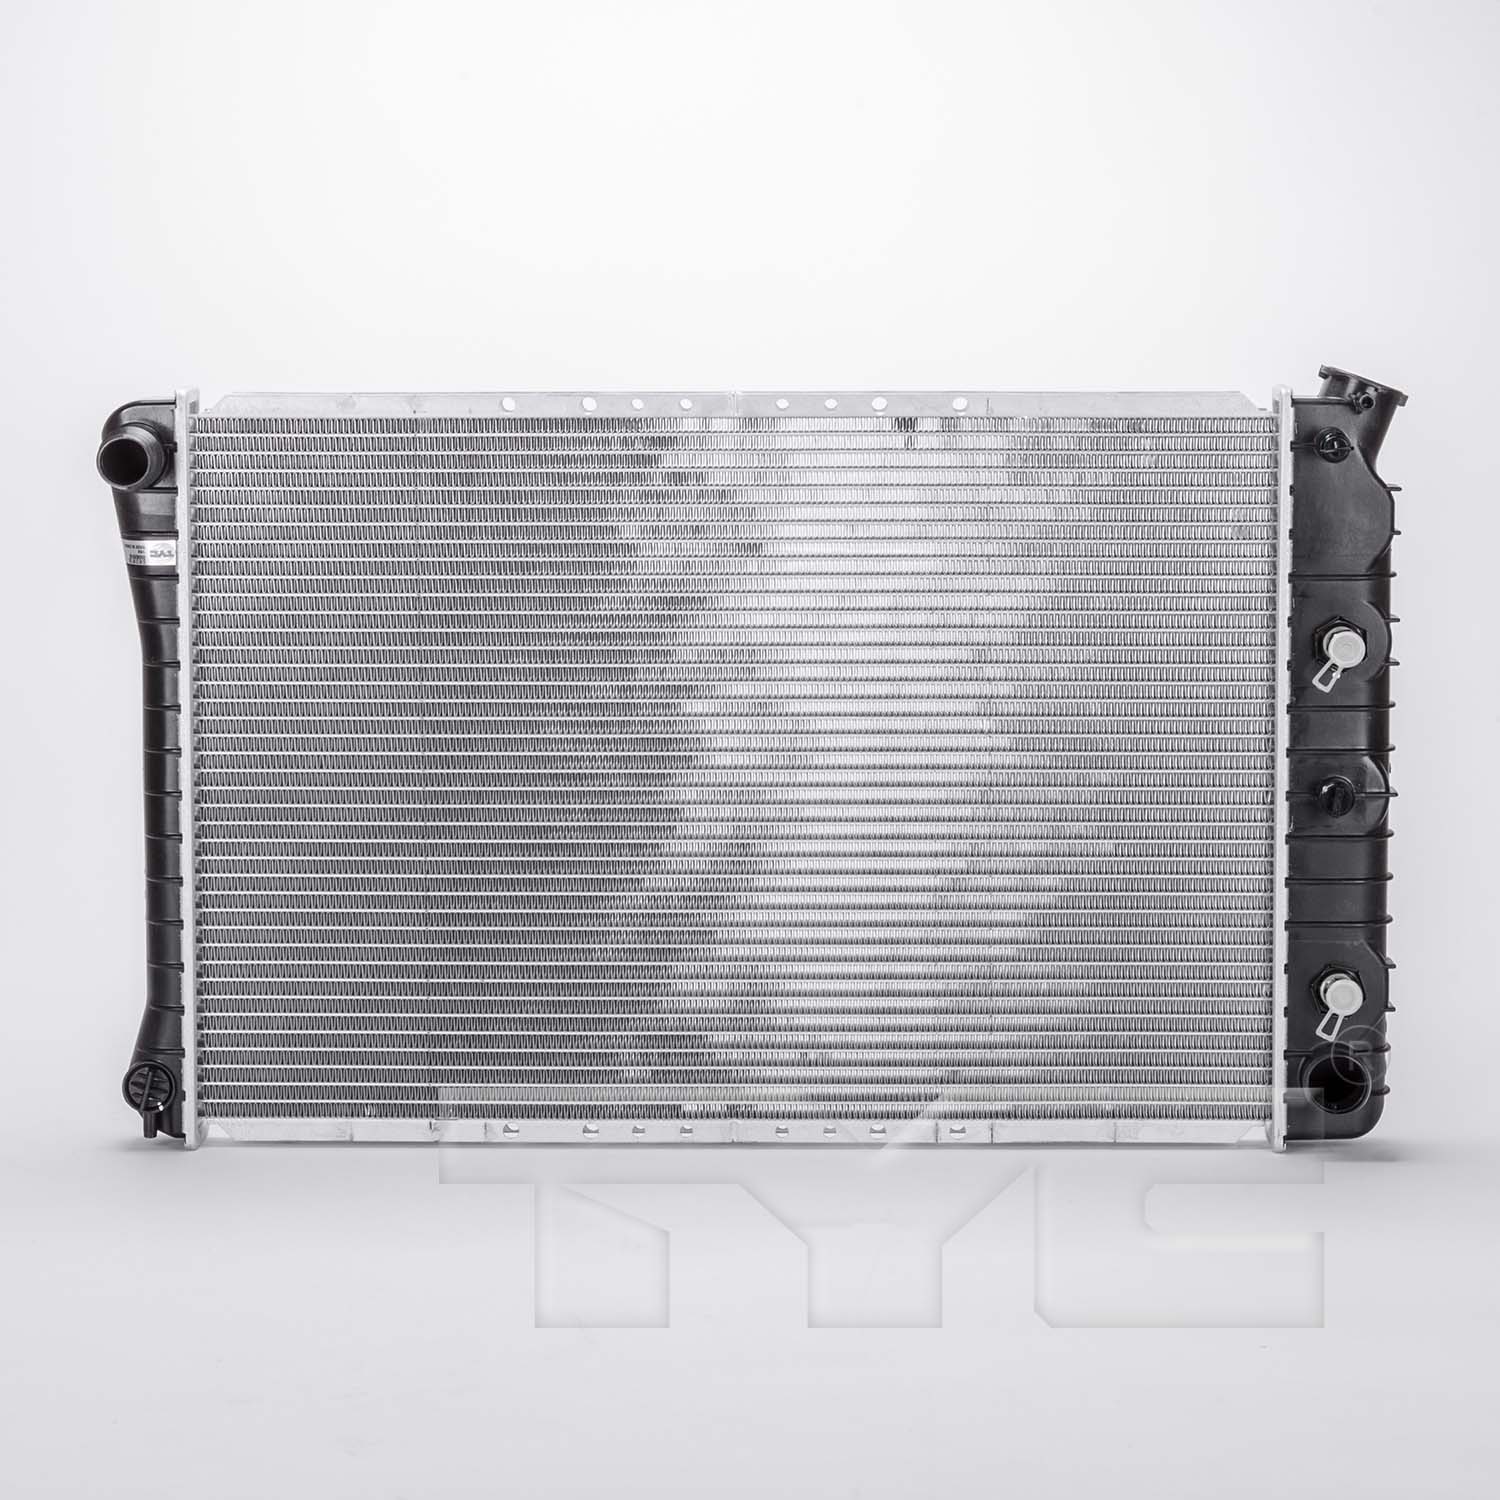 Aftermarket RADIATORS for CHEVROLET - MONTE CARLO, MONTE CARLO,82-88,Radiator assembly